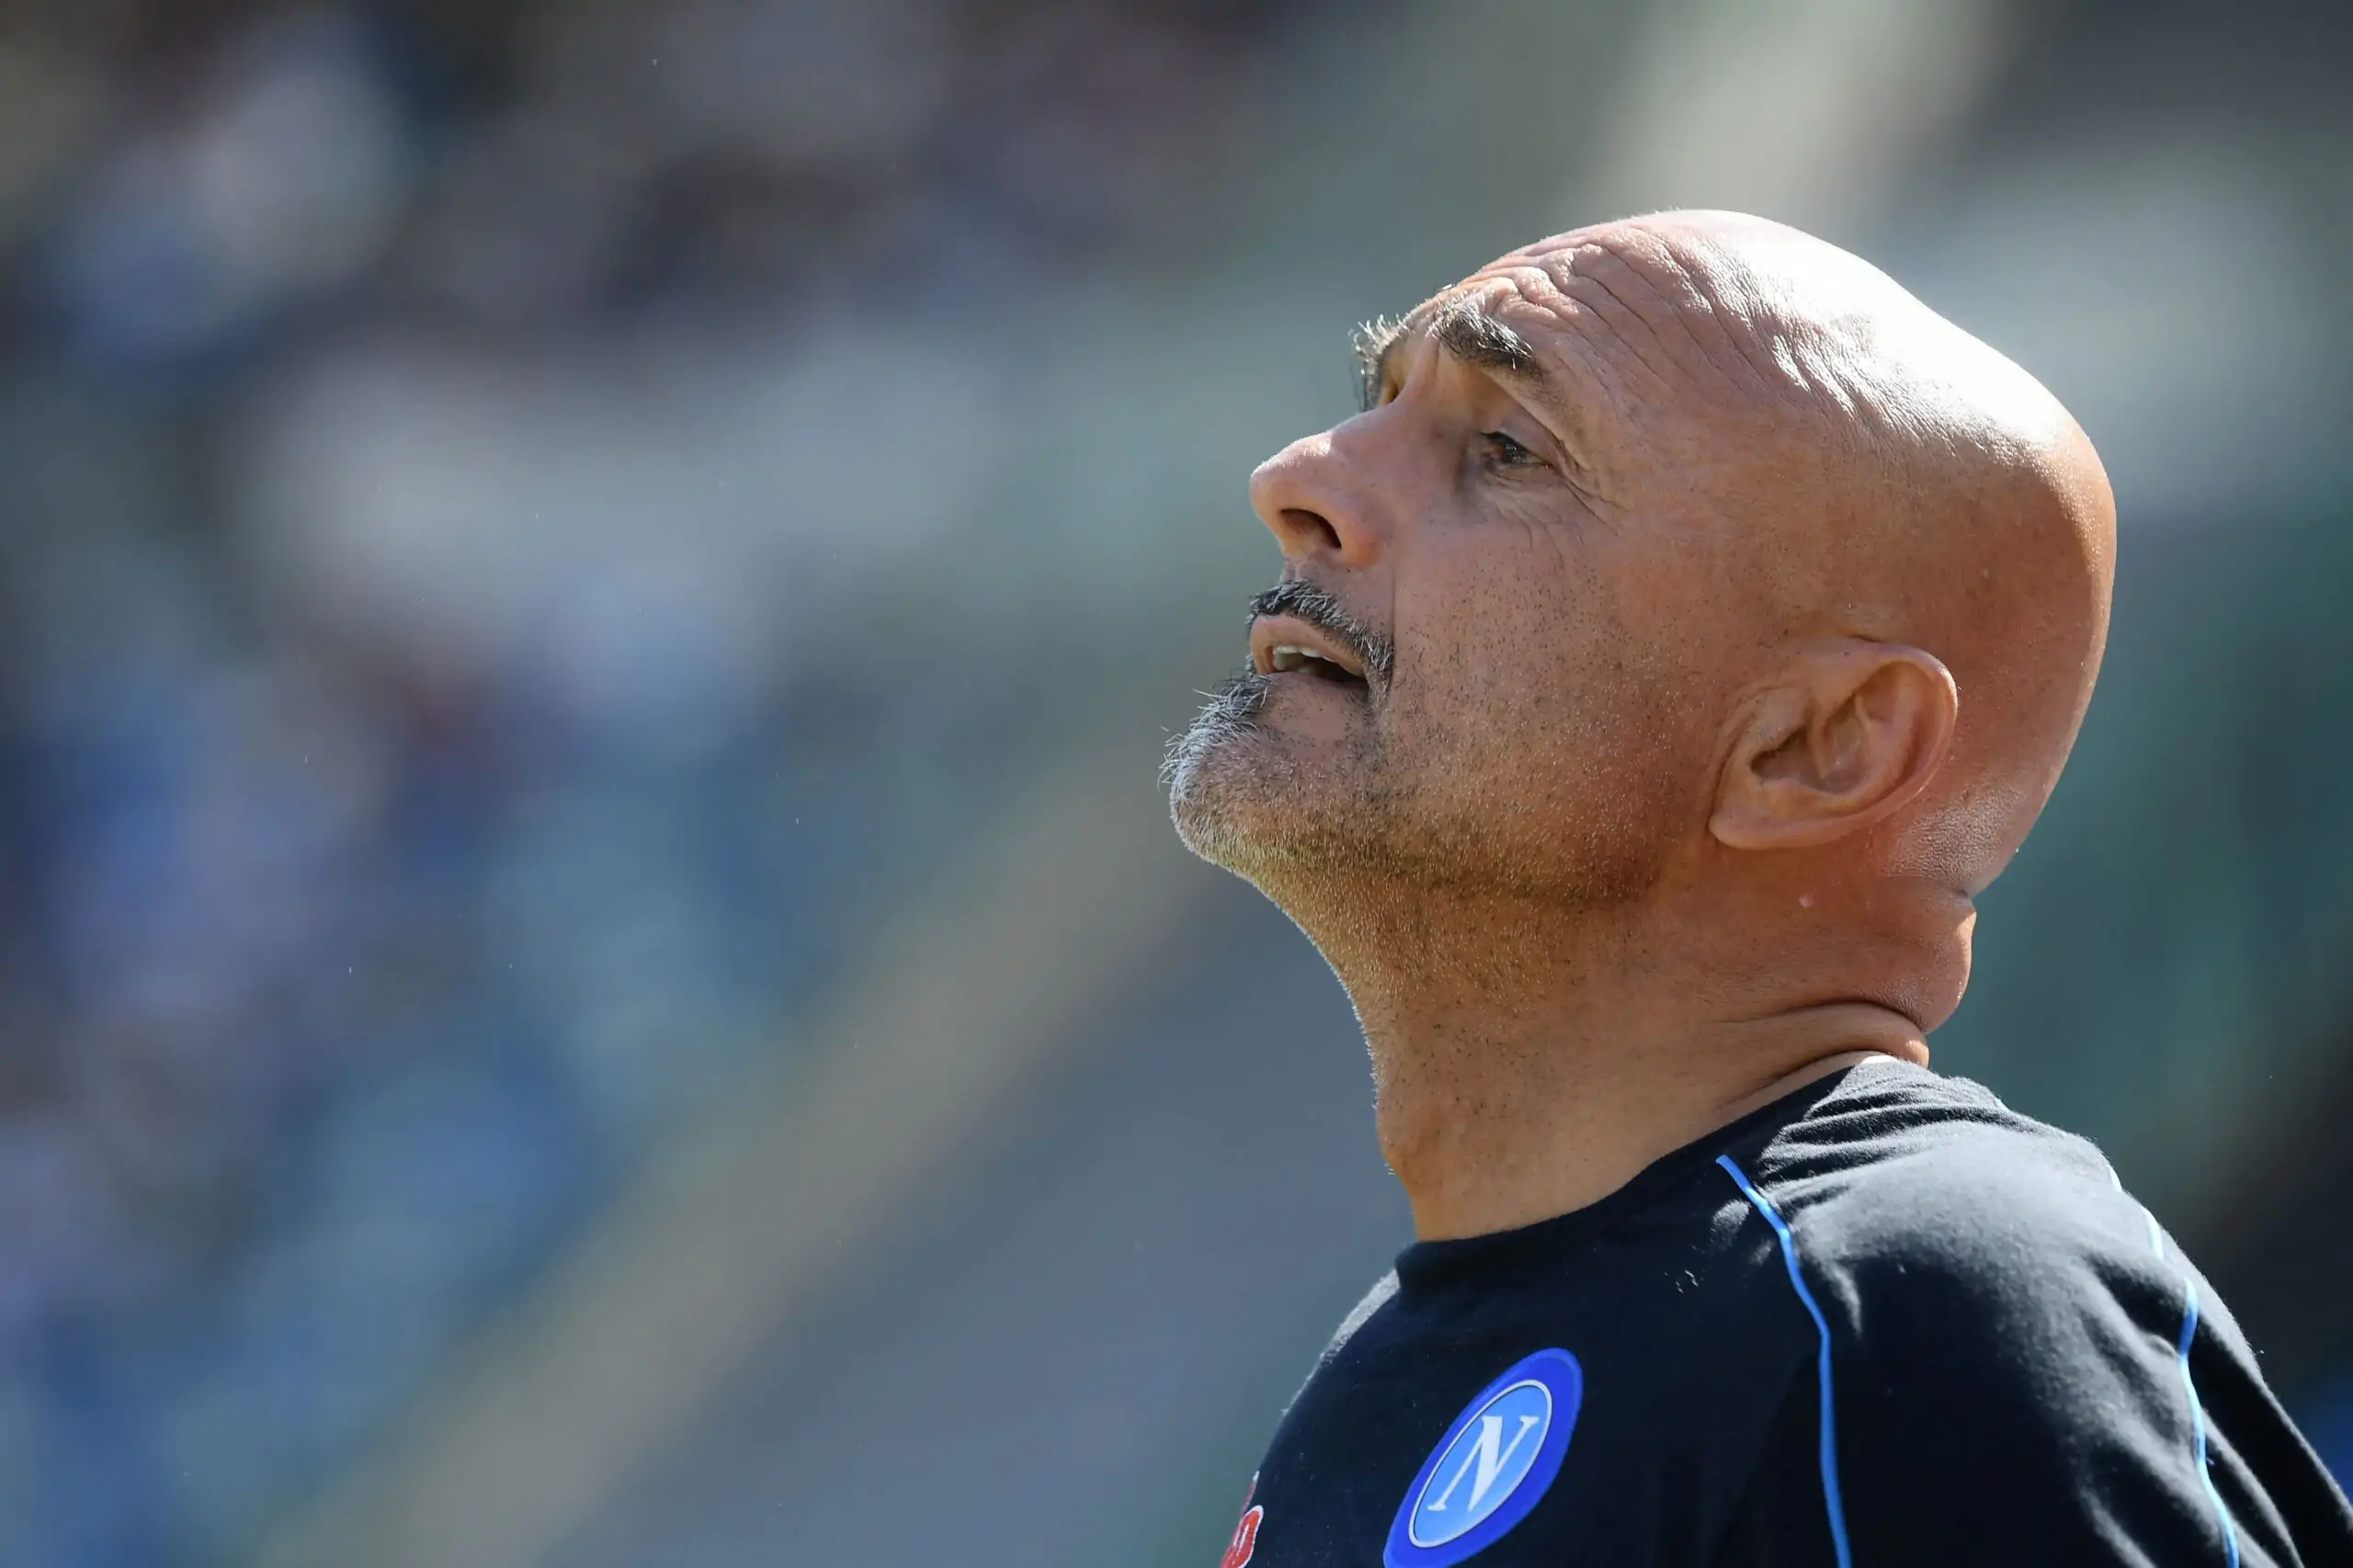 Napoli president Aurelio De Laurentiis announced that Luciano Spalletti would step down at the end of the season as he wants a sabbatical.